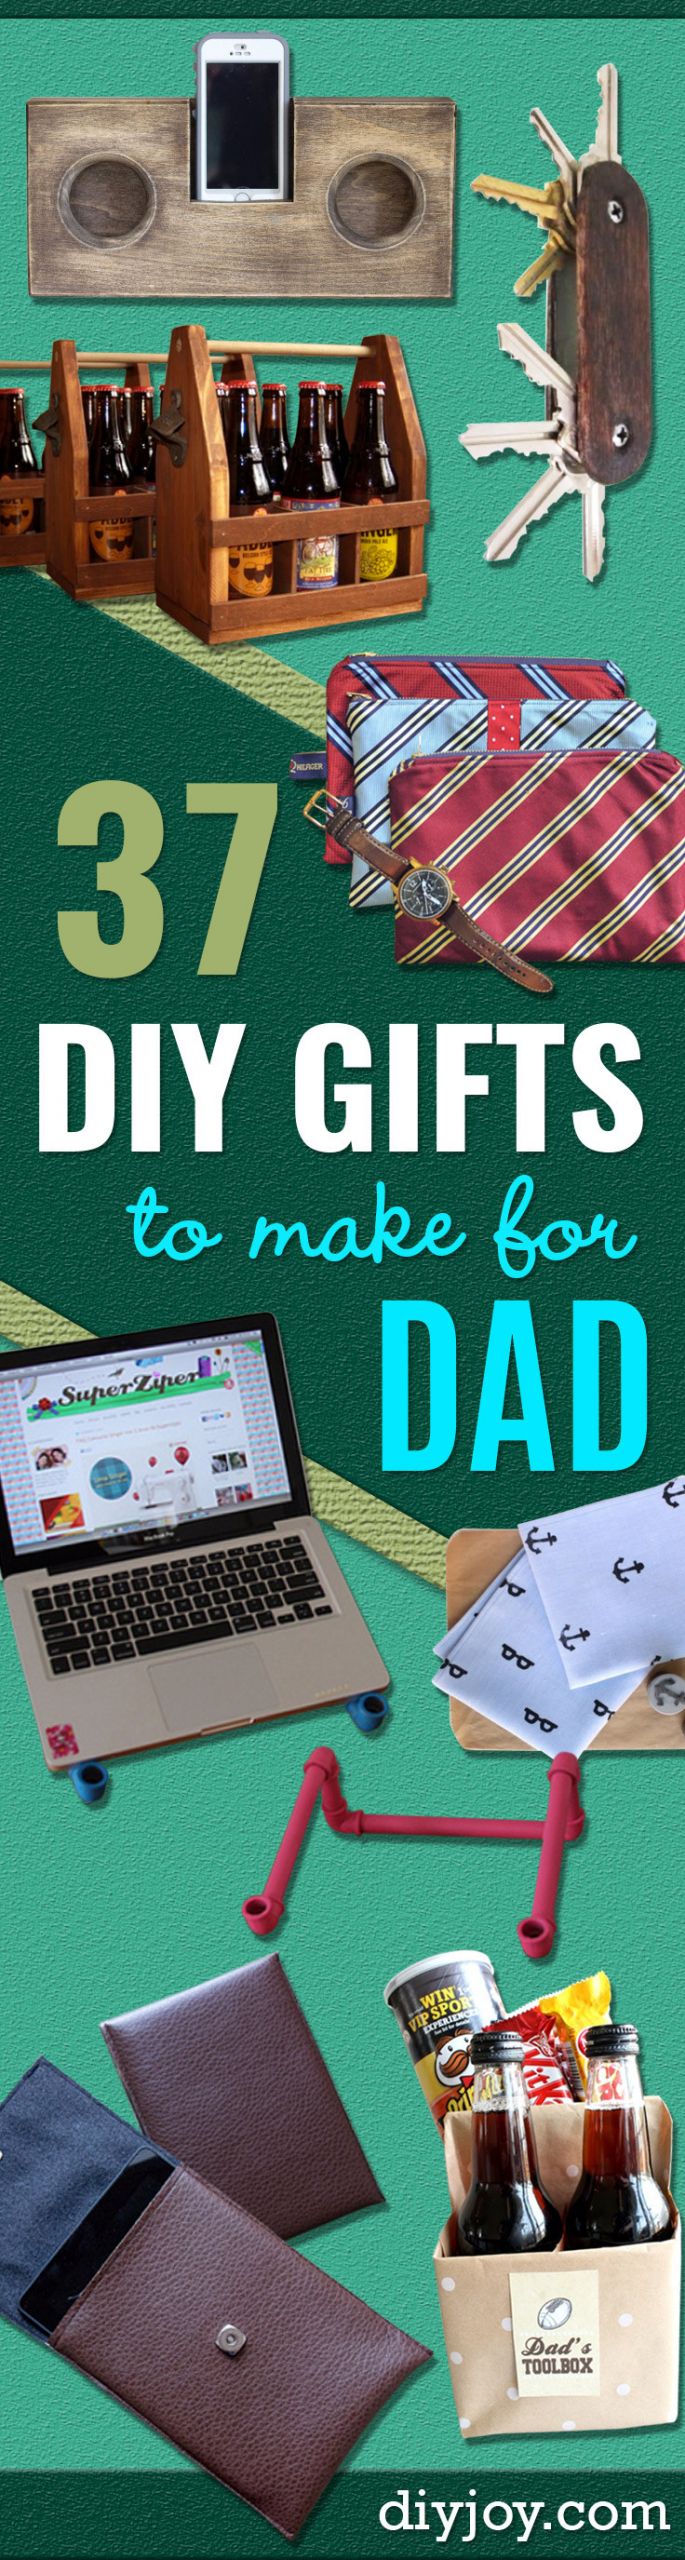 DIY Gift For Dad Christmas
 37 Awesome DIY Gifts to Make for Dad